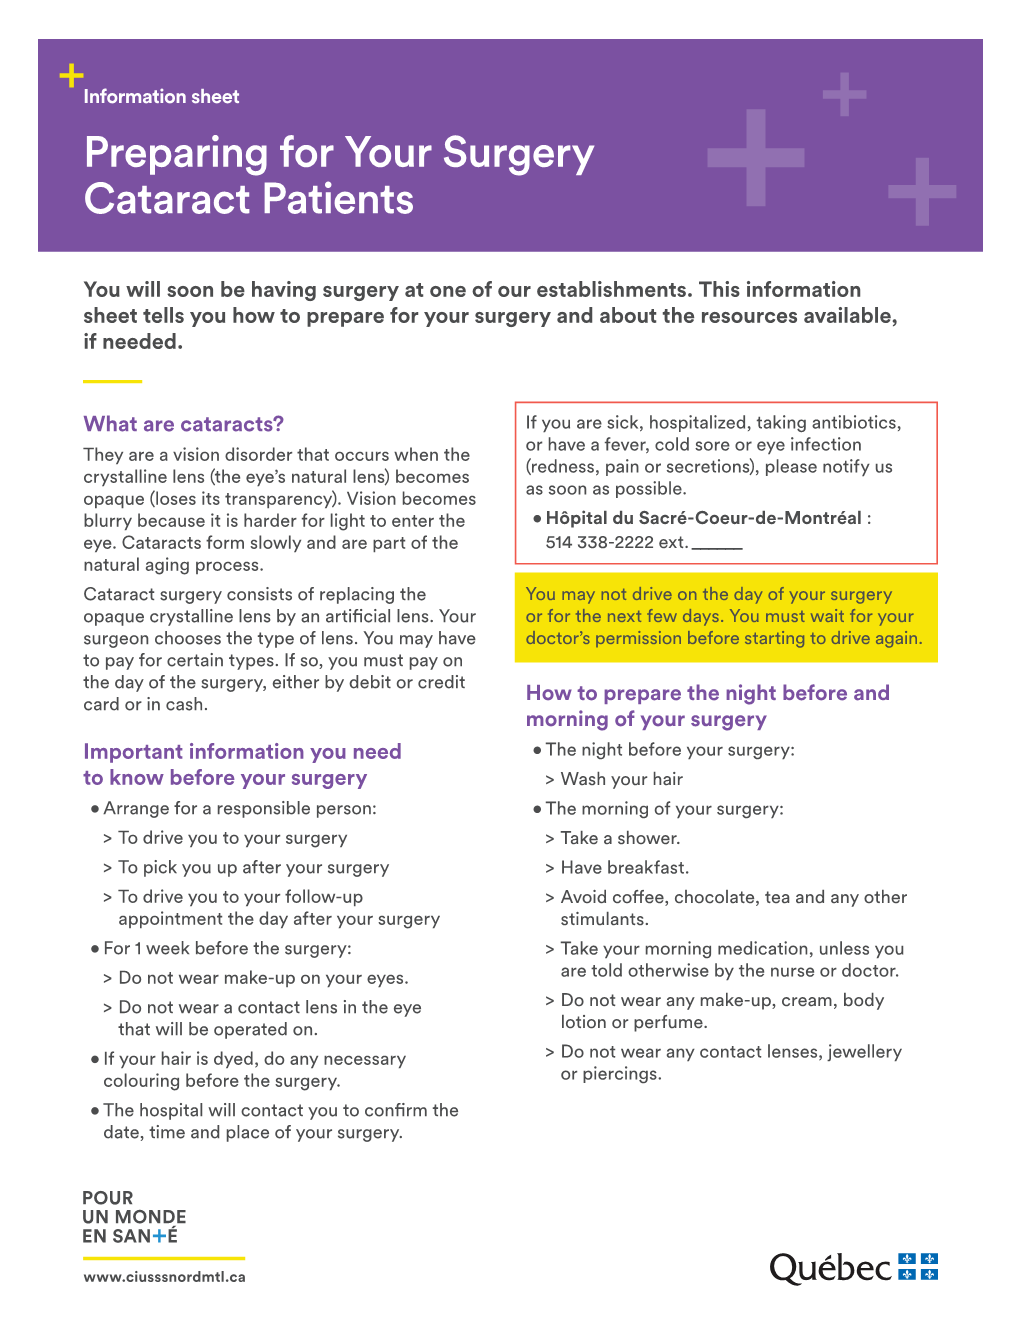 Preparing for Your Surgery Cataract Patients